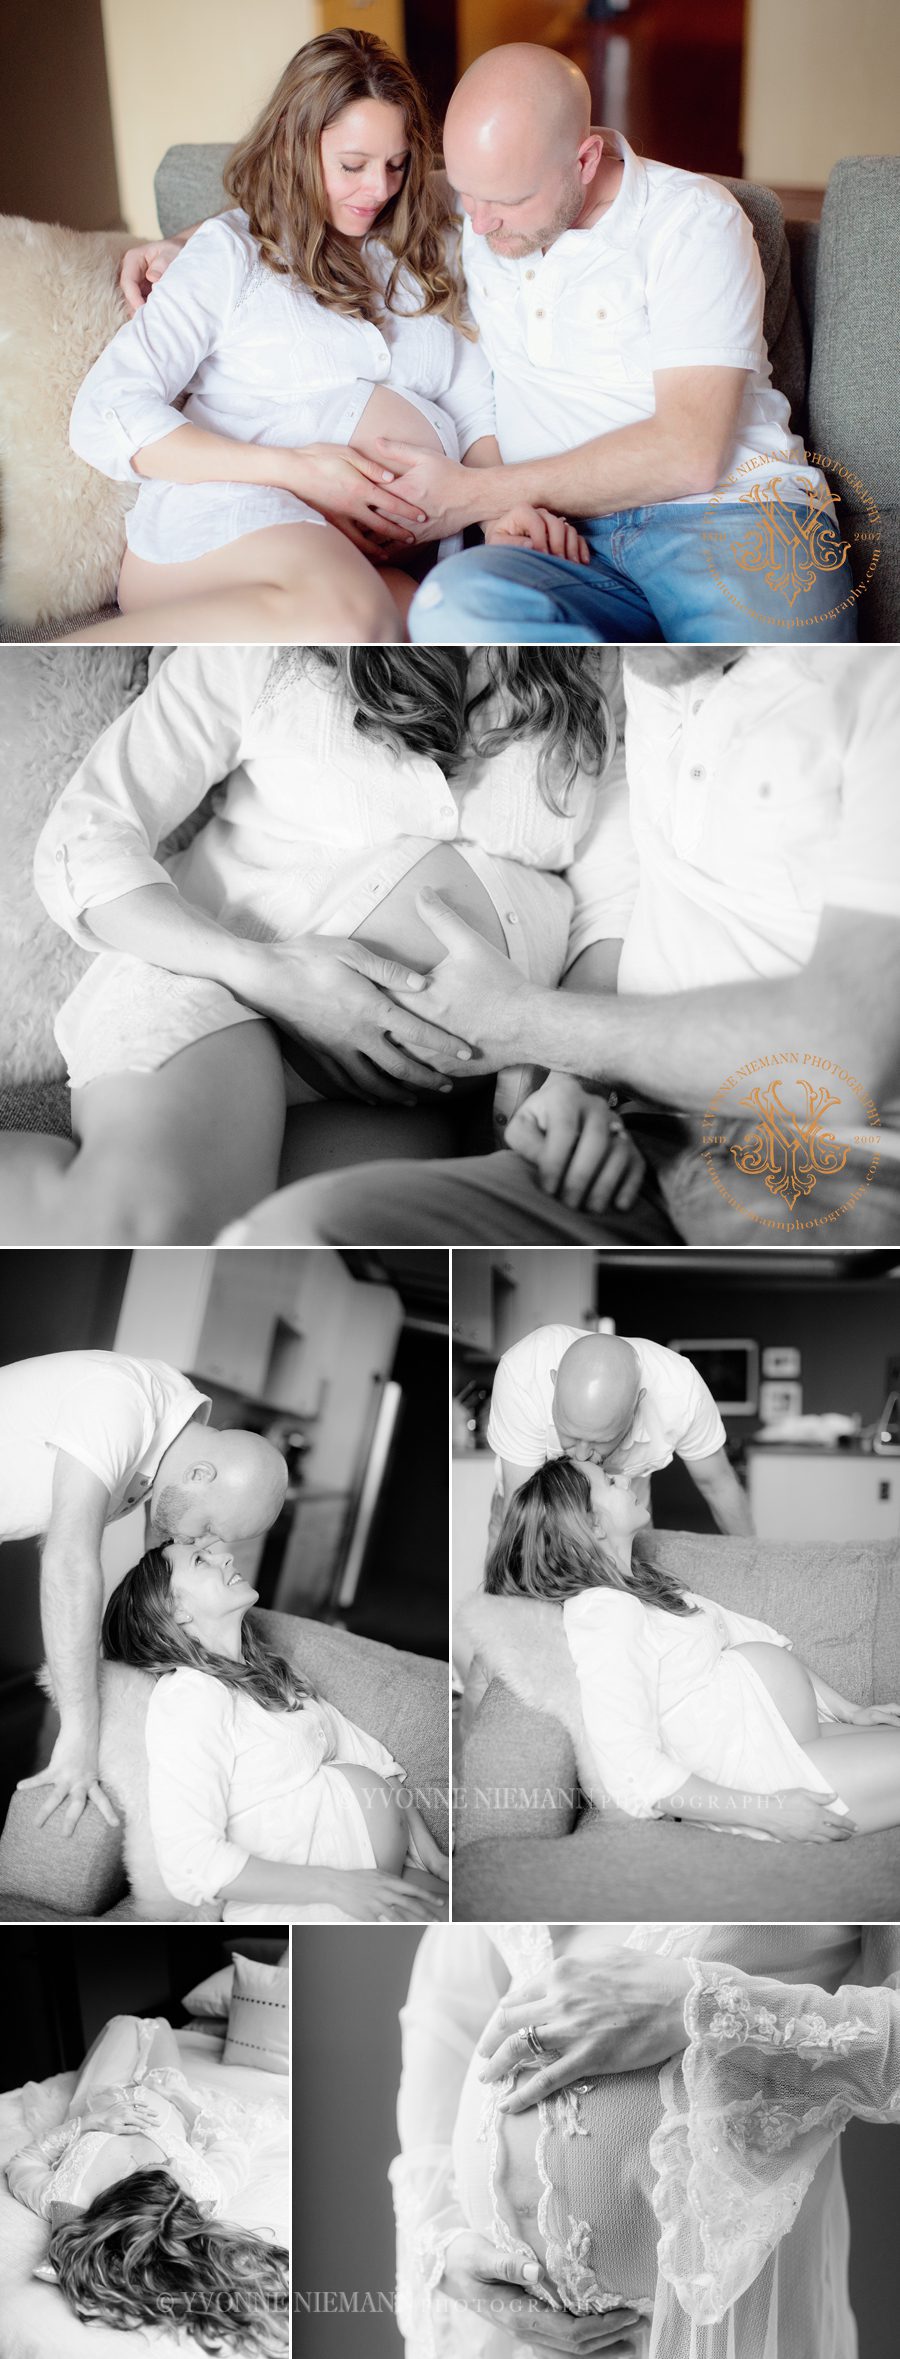 Photos of loving couple pregnant with first child taken in their home in Athens, GA by Yvonne Niemann Photography.